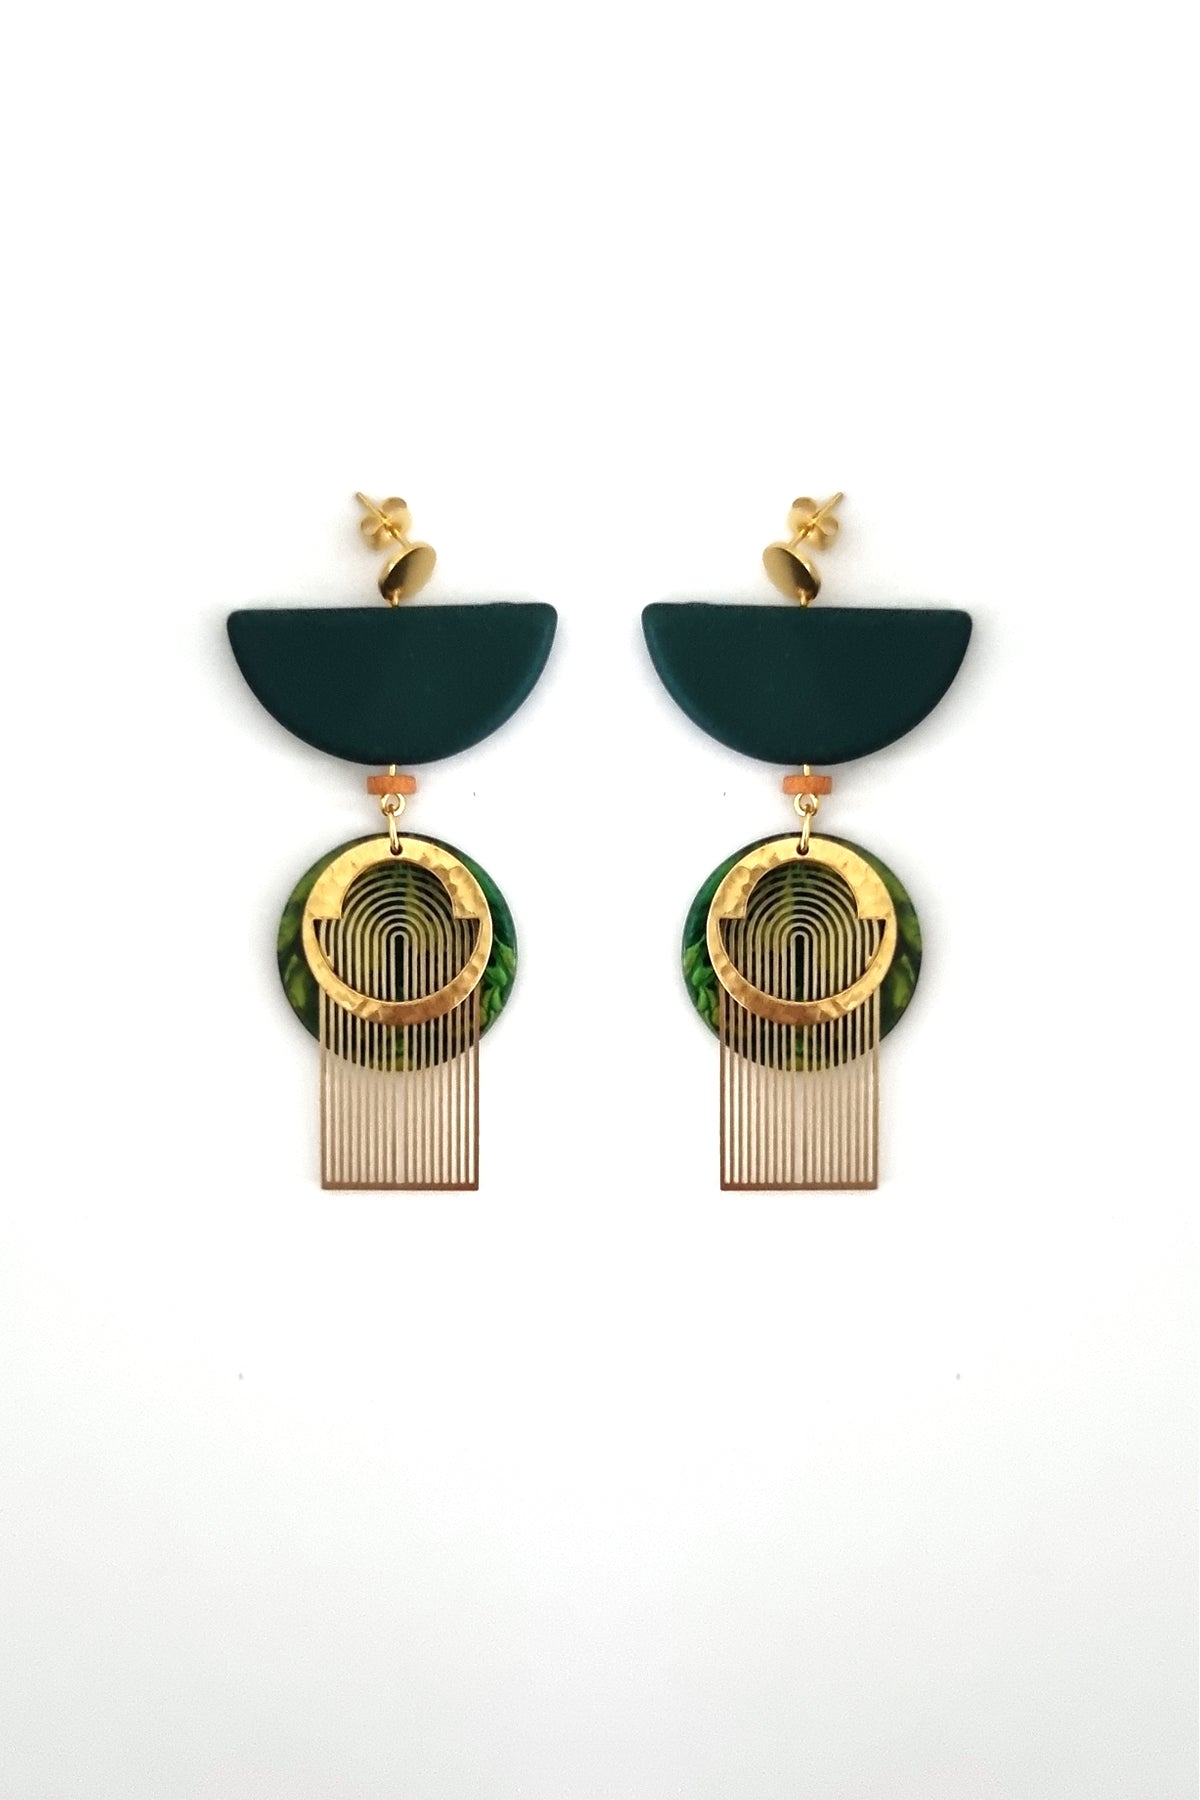 A pair of green dangle earrings with a stud top sit against a white background. They feature a green half circle bead, a small wooden bead, a green acrylic circle, a brass arch piece, and a textured circular brass piece.